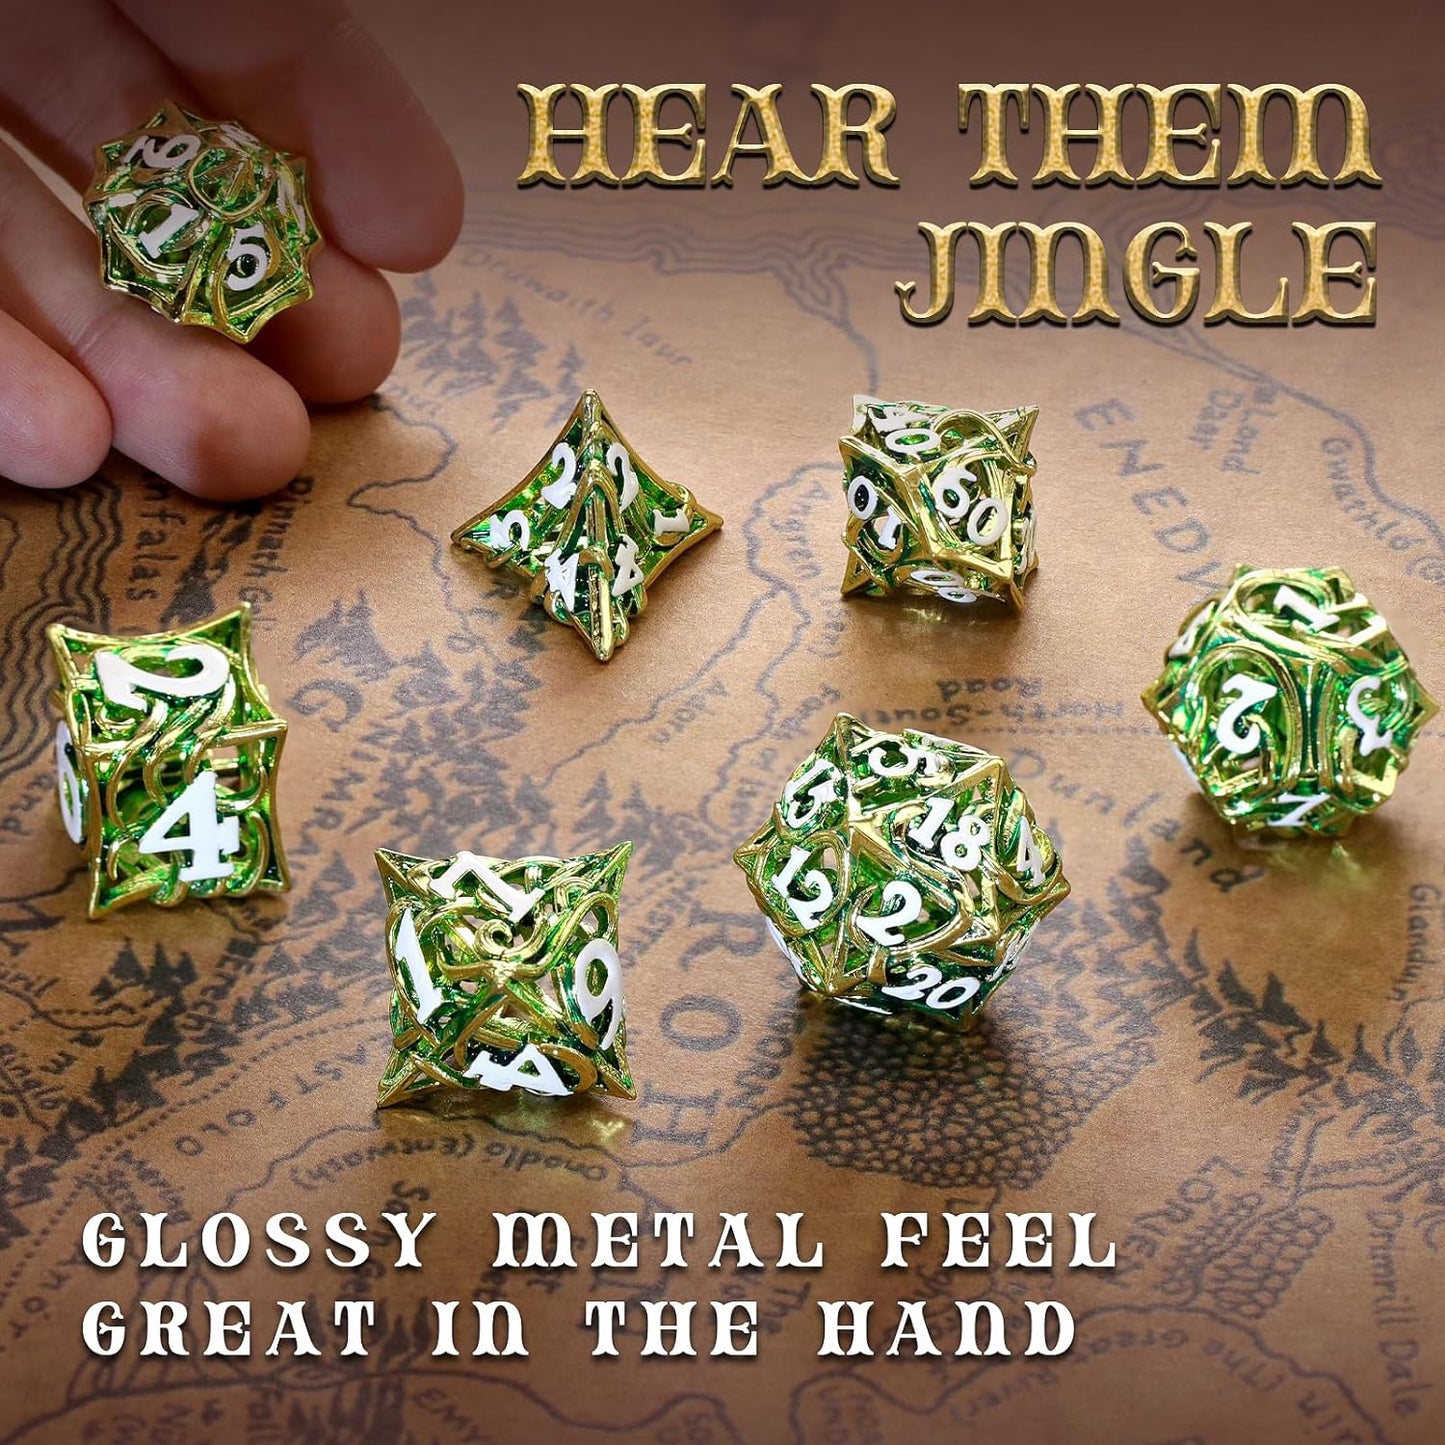 7PCS Metal DND Dice Set  Hollow Polyhedral Hollowl Vine Dice Set D&D Role Playing D and D RPG Dice ( Green)